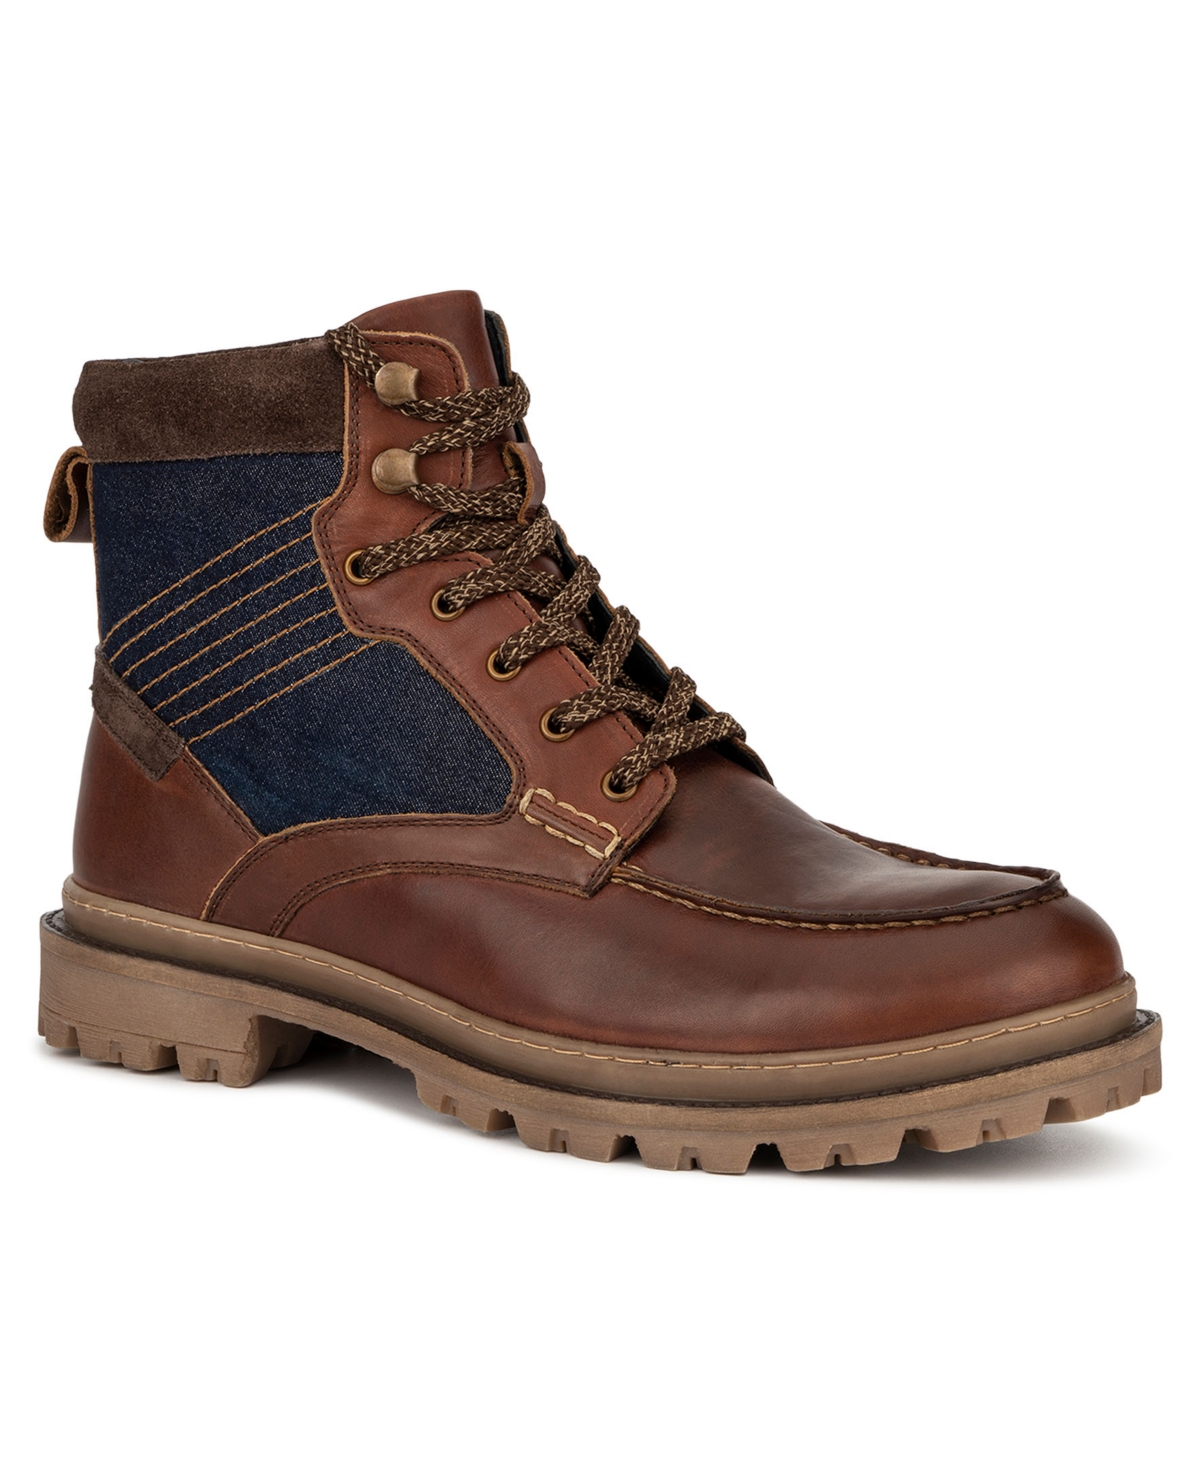 Men's Vector Leather Work Boots - Tan